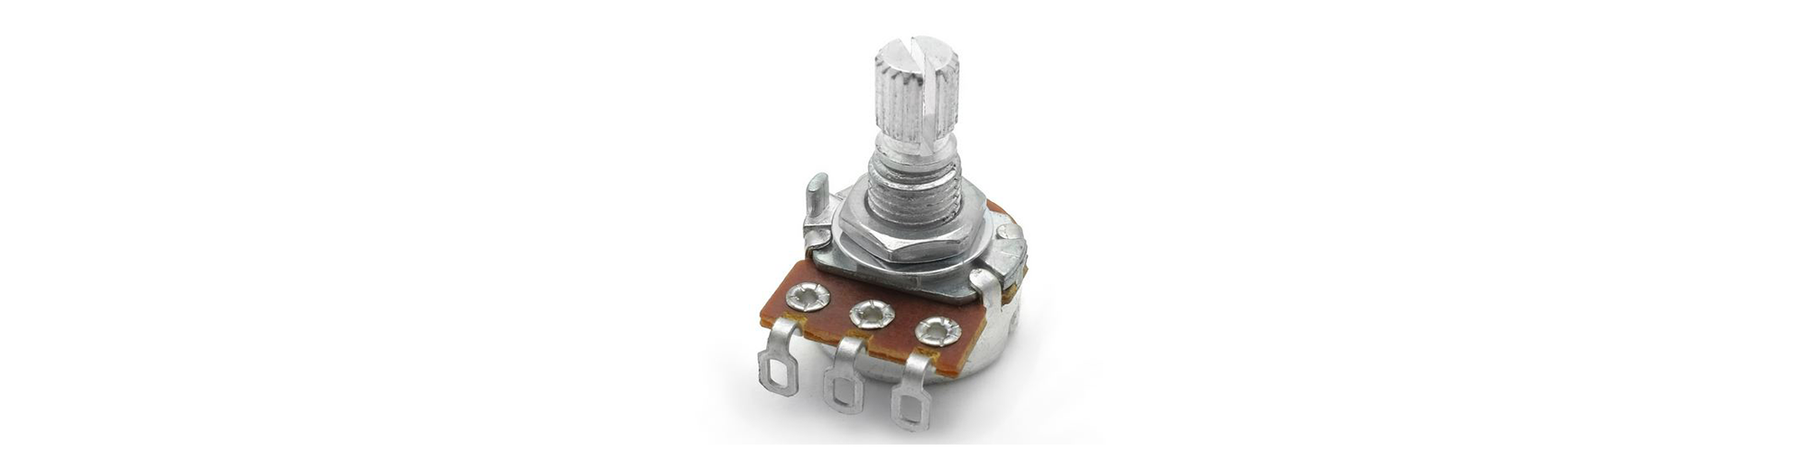 Electronic Components - Potentiometers